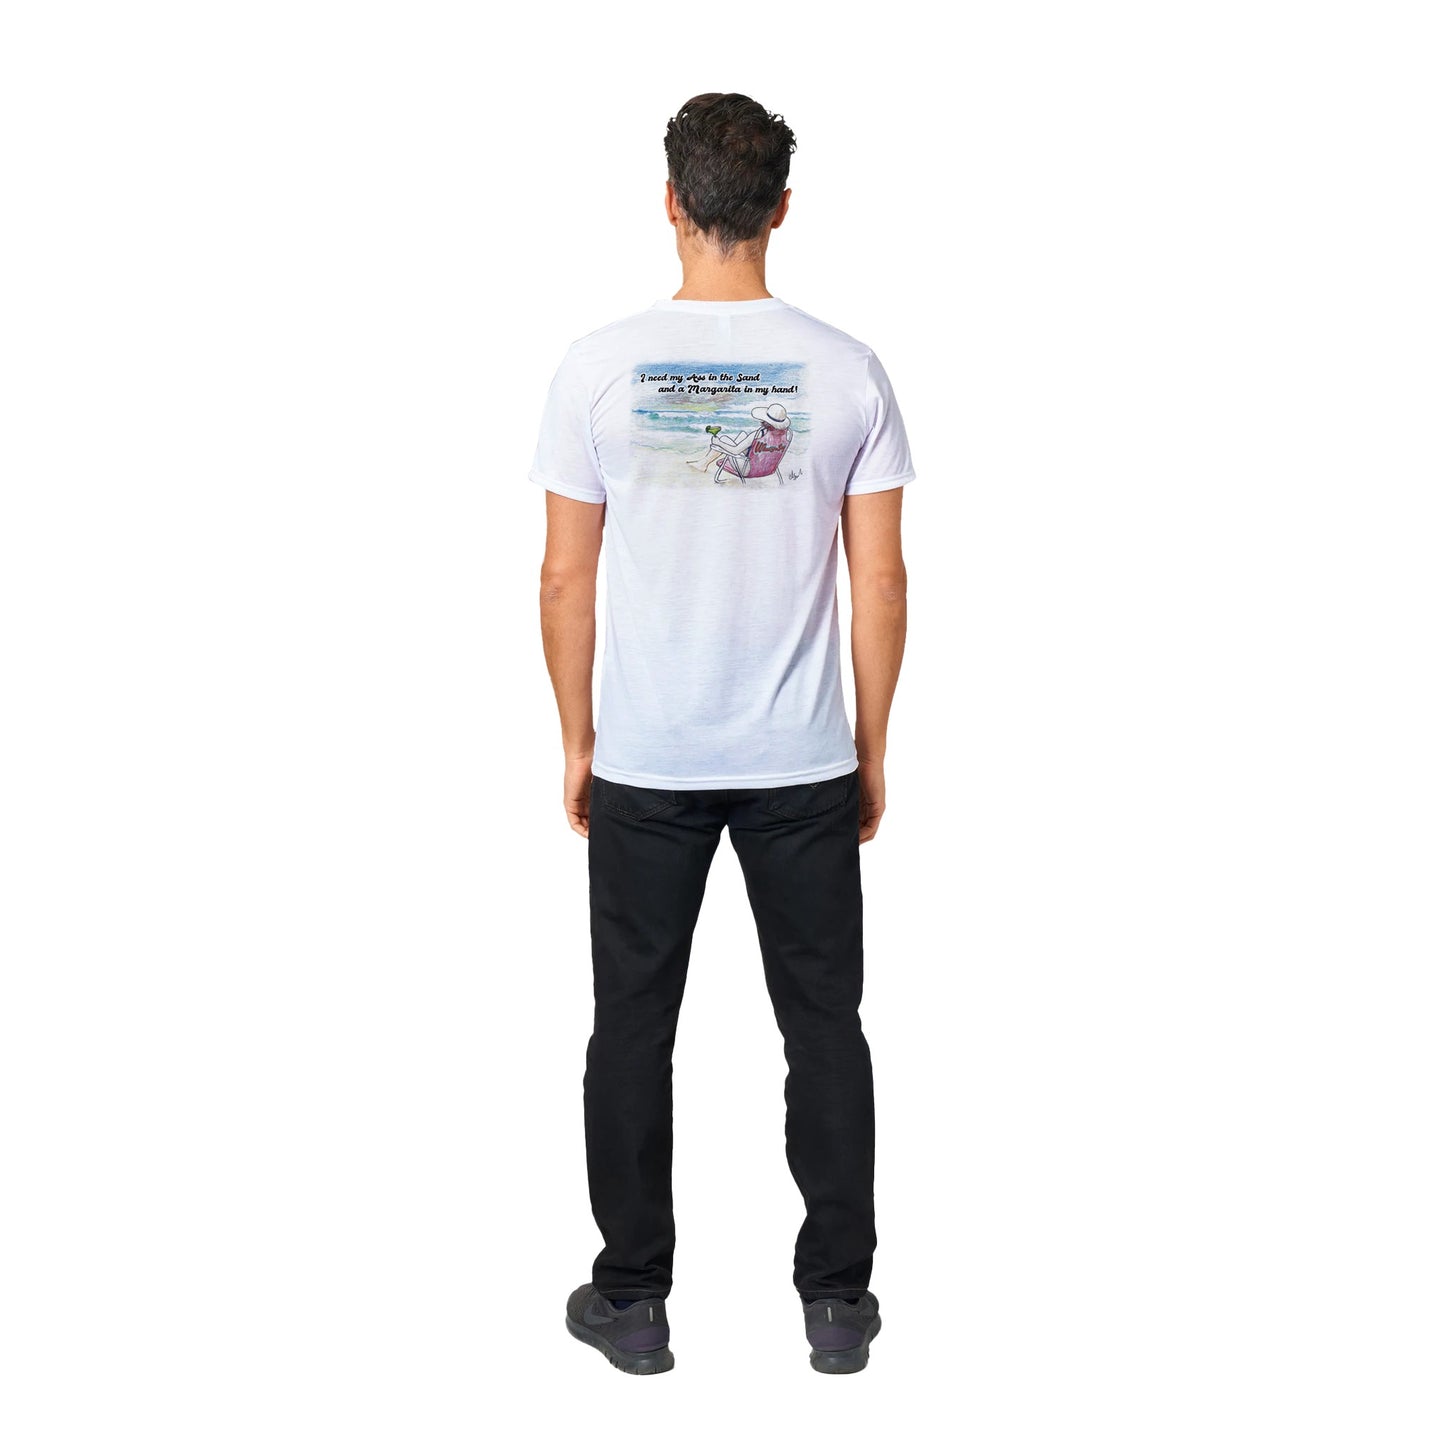 A white Performance Moisture-wicking with PosiCharge Unisex Crewneck t-shirt with original artwork and motto I need my Ass in the Sand and a Margarita in my hand on back of t-shirt and WhatYa Say logo on front from WhatYa Say Apparel a rear view of short dark haired male model.